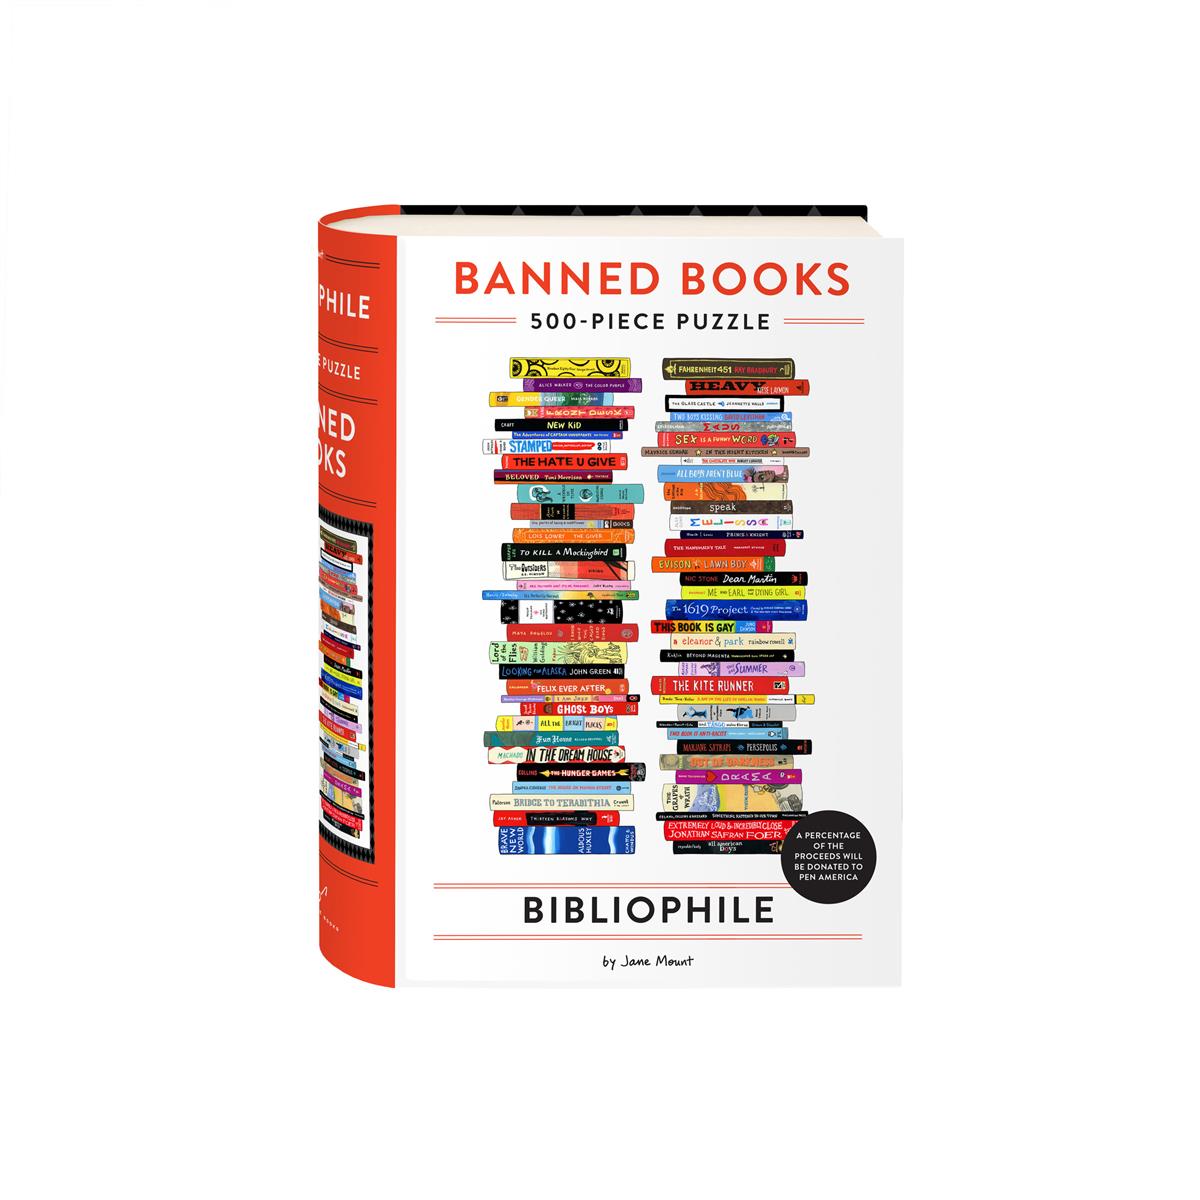 Bibliophile Banned Books 500-Piece Puzzle By (author): Jane Mount